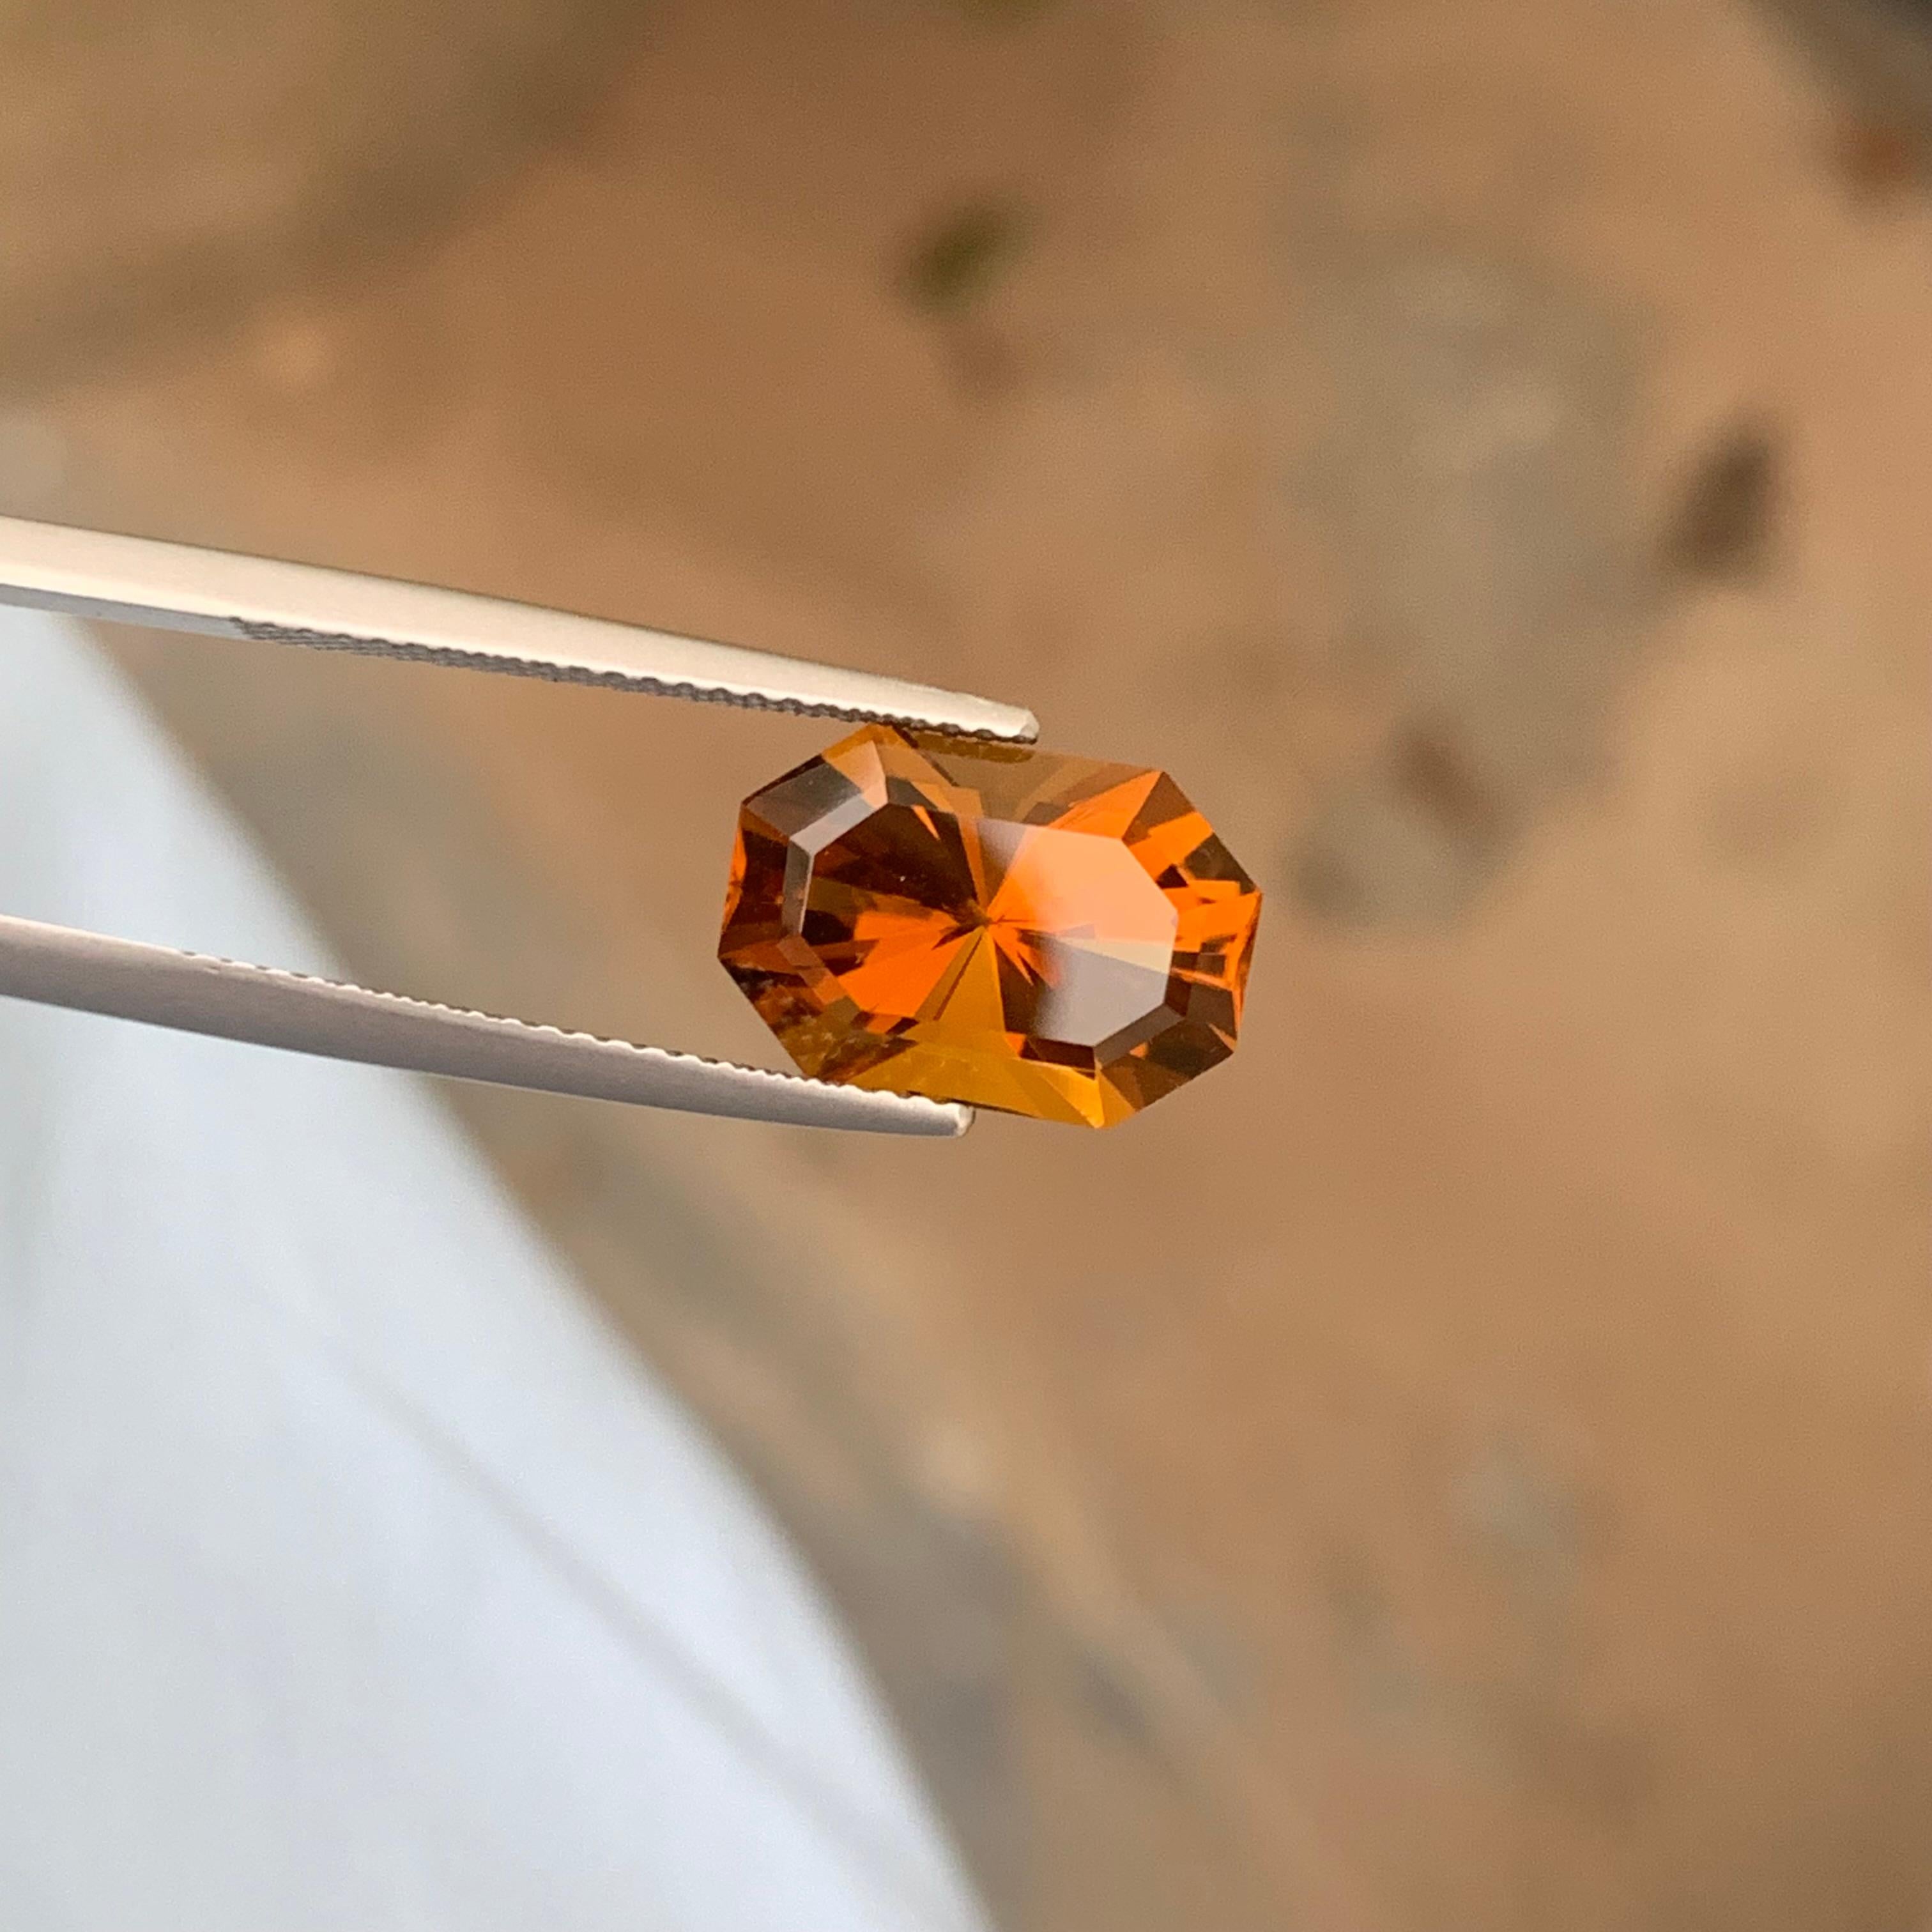 Gorgeous Loose 5.0 Carat Fancy Cut Brown Citrine Gemstone from Brazil For Sale 4